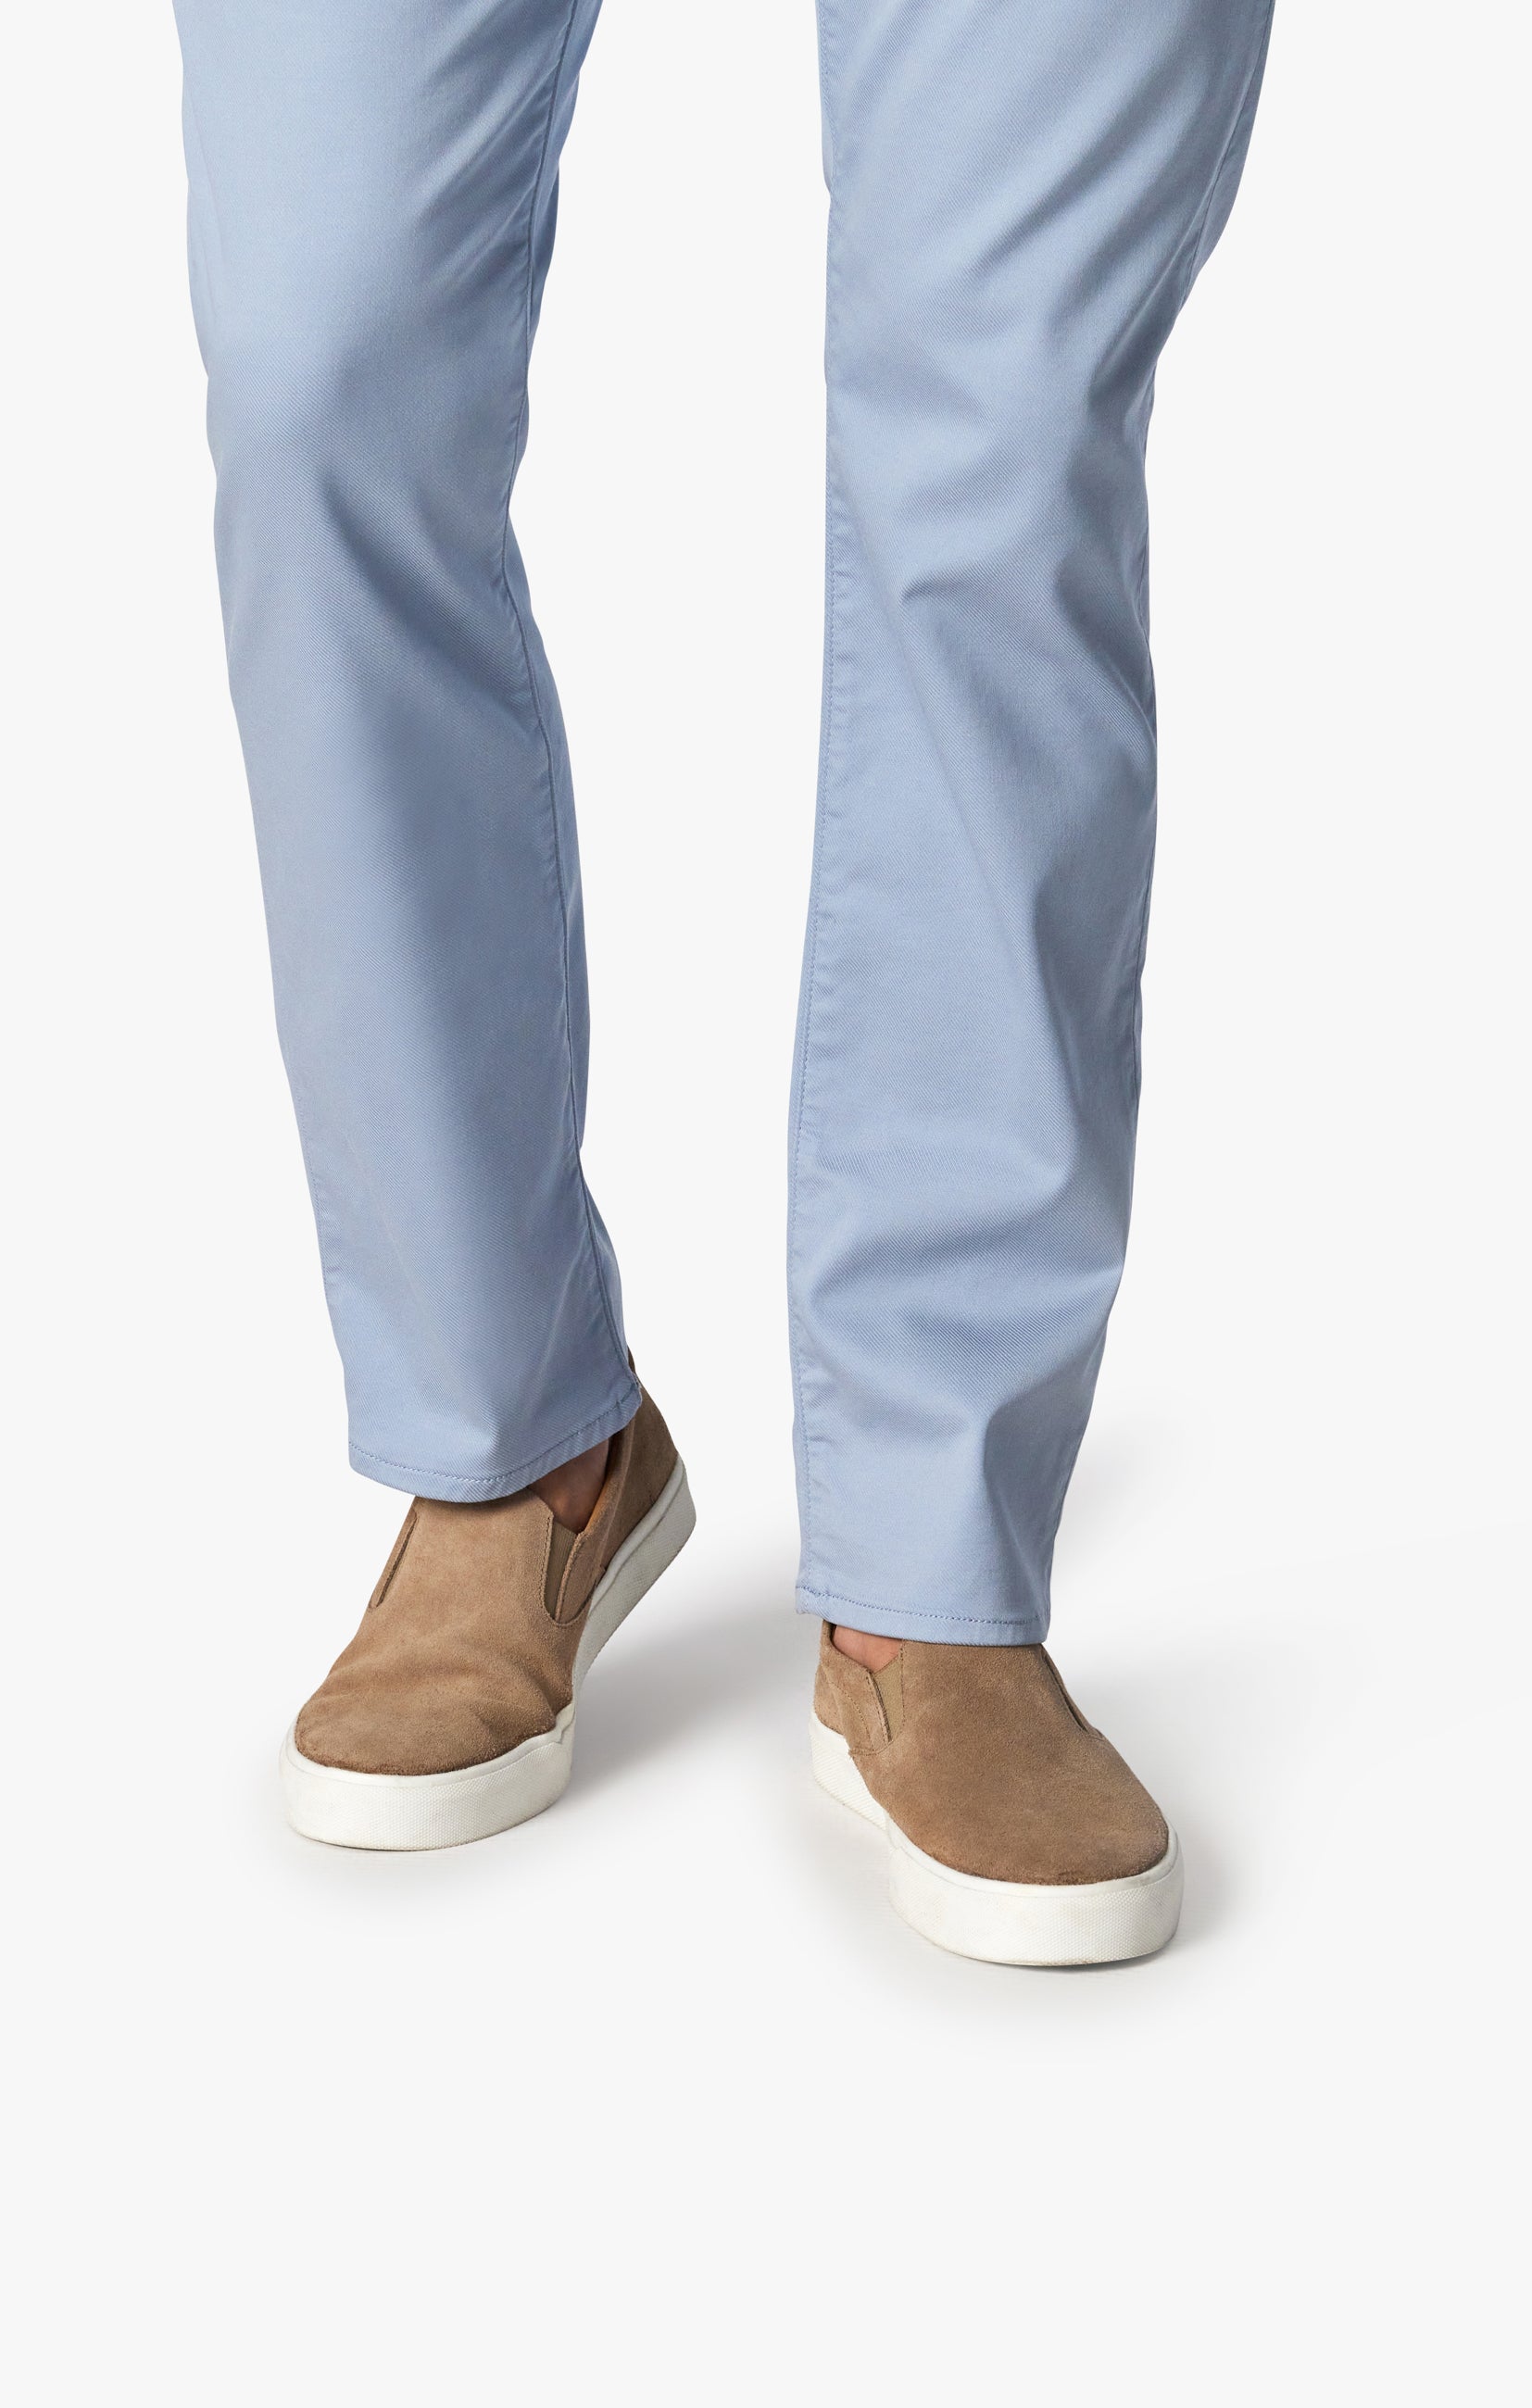 Courage Straight Leg Pants In French Blue Summer Coolmax Image 3